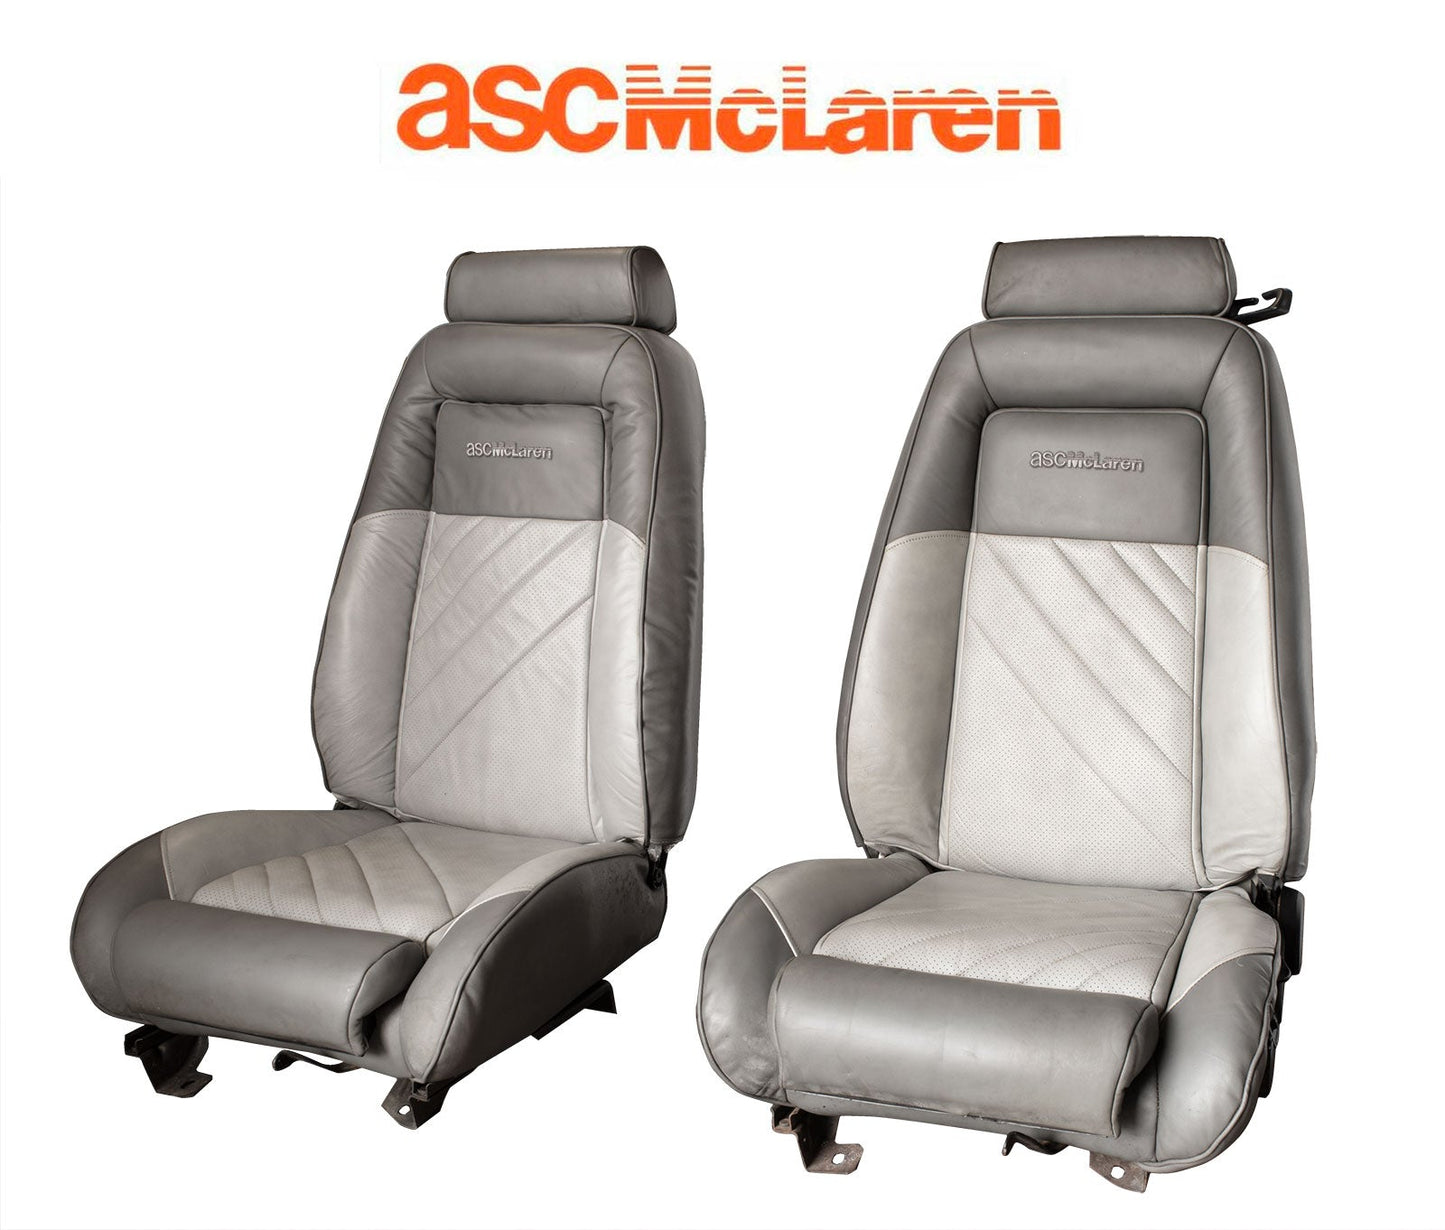 1987-1990 ASC McLaren Mustang OEM NOS Complete Seats Two Tone Gray Upholstery